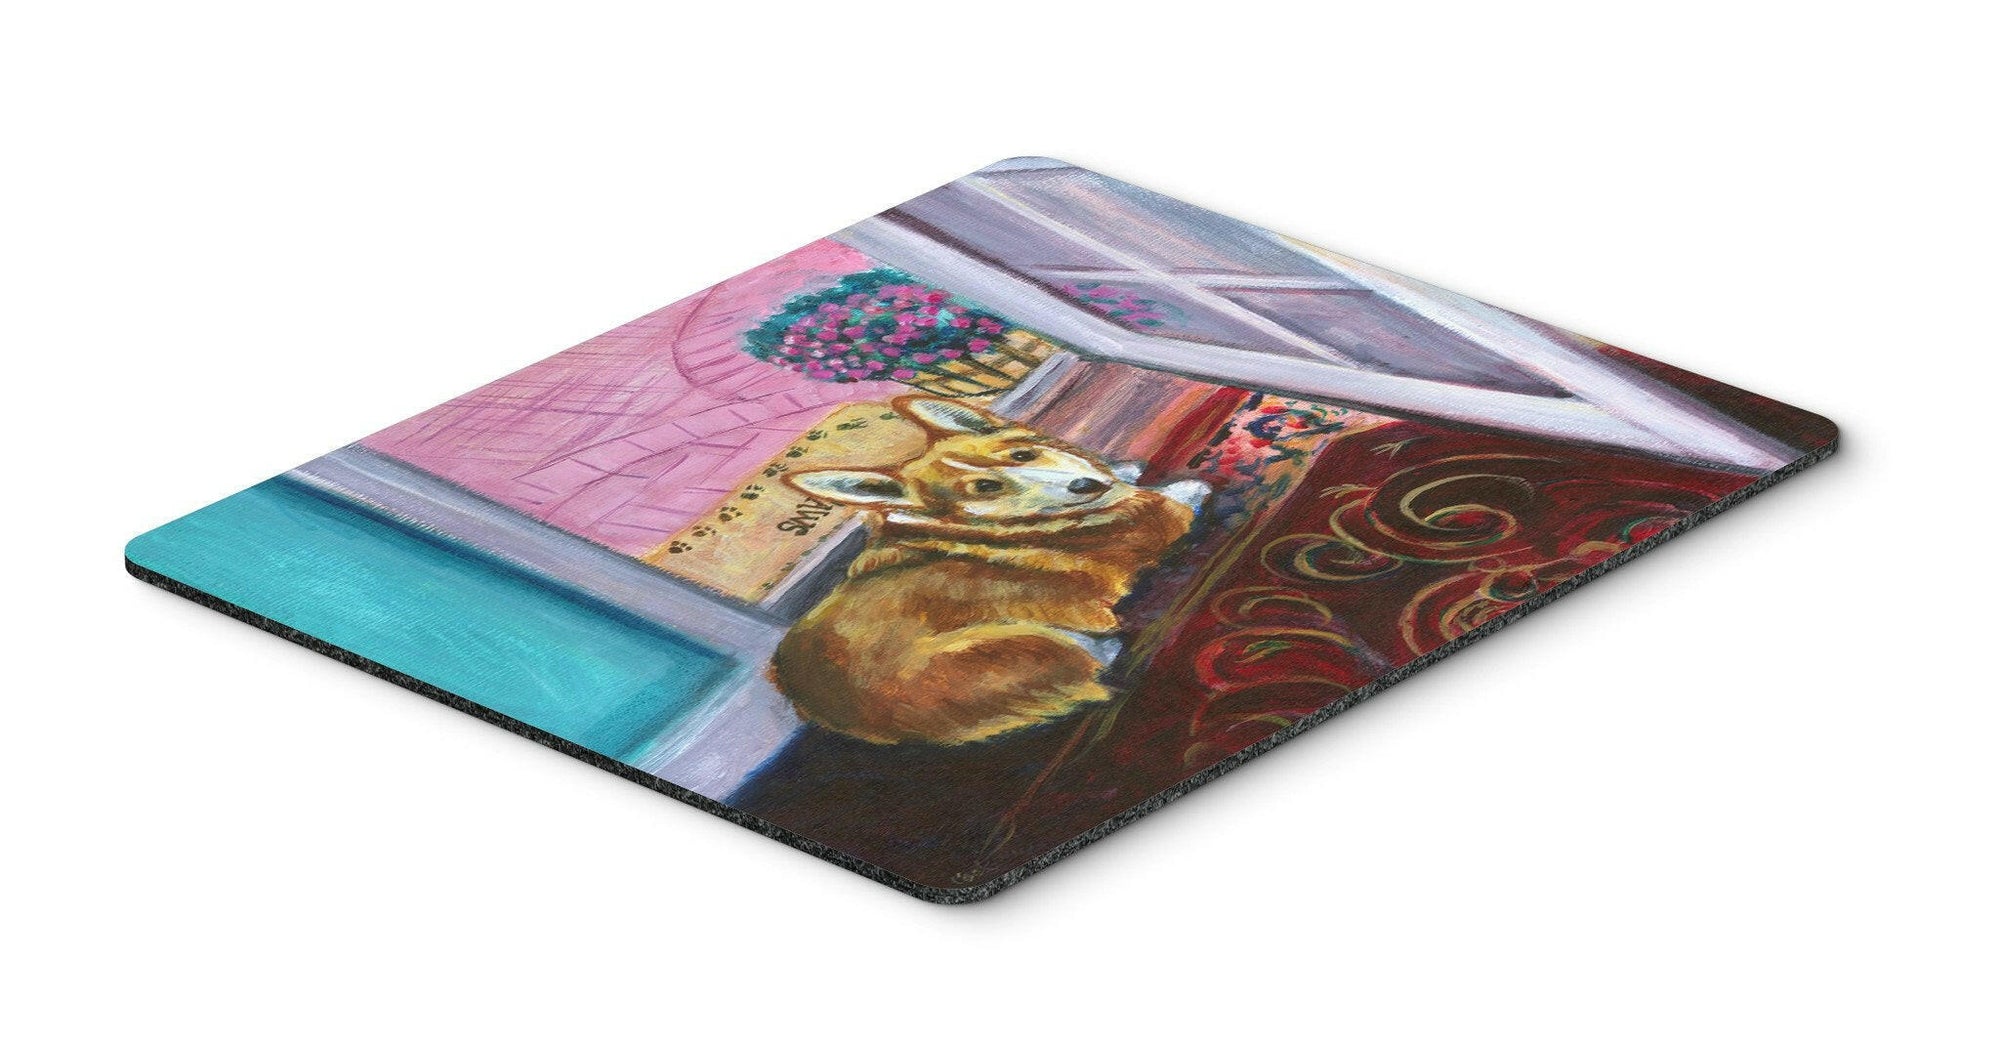 Corgi Watching from the Door Mouse Pad, Hot Pad or Trivet 7410MP by Caroline's Treasures